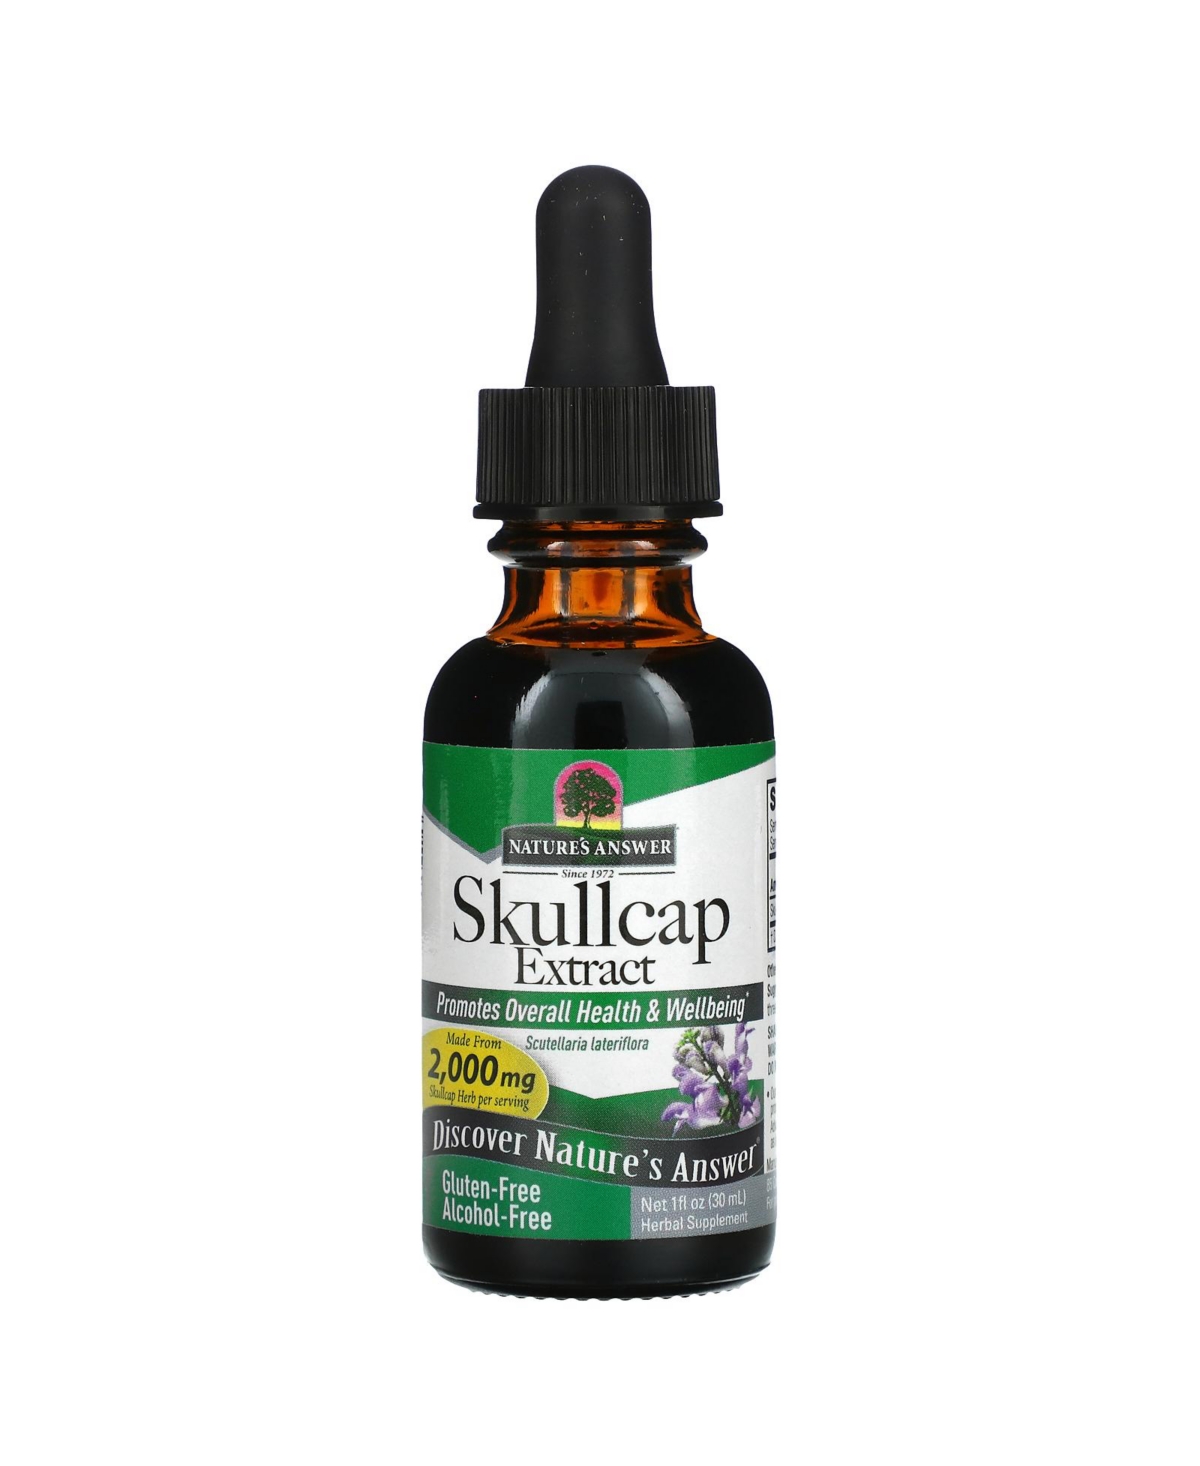 Skullcap Extract Alcohol-Free 2 000 mg - 1 fl oz (30 ml) - Assorted Pre-pack (See Table